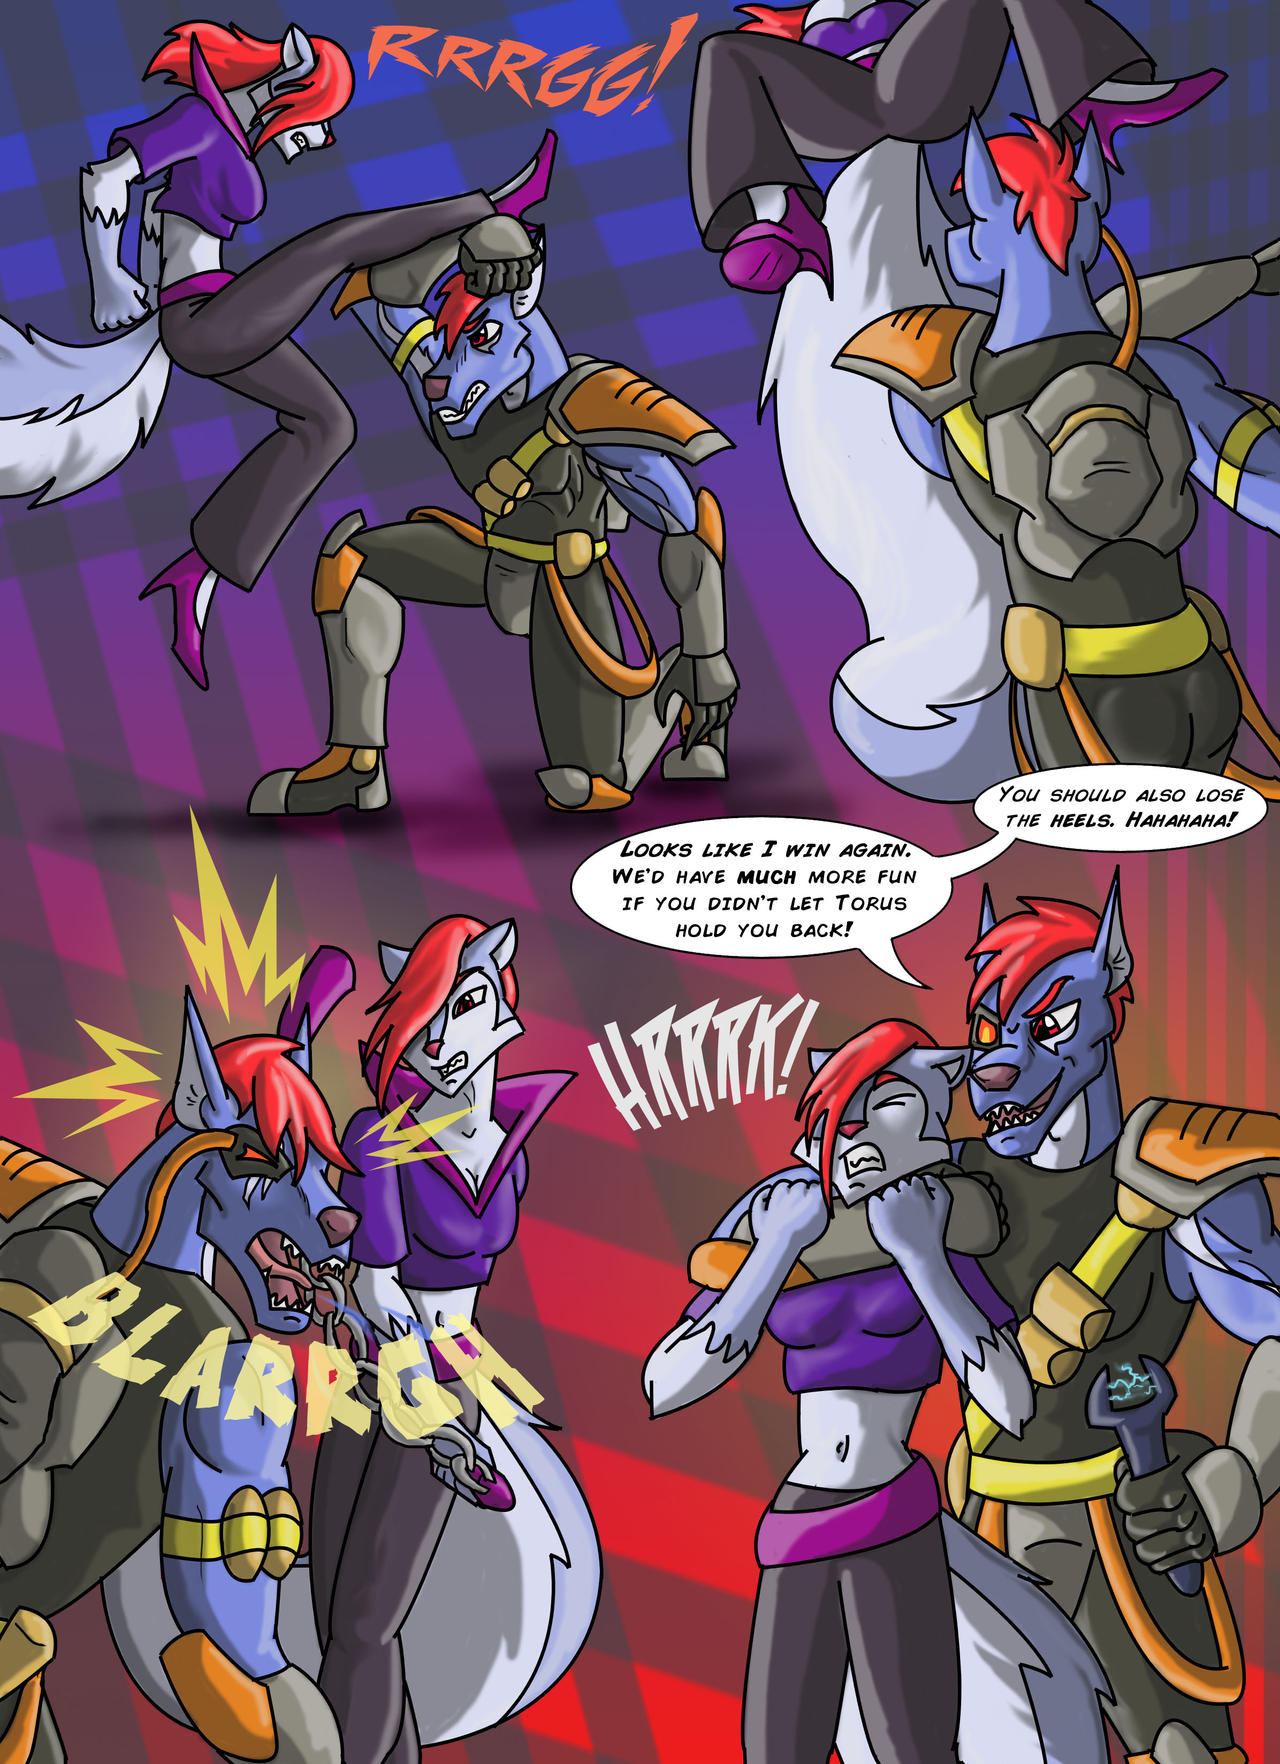 Sly Cooper: Sins of the Fathers (Page Five) by LonePhantom -- Fur